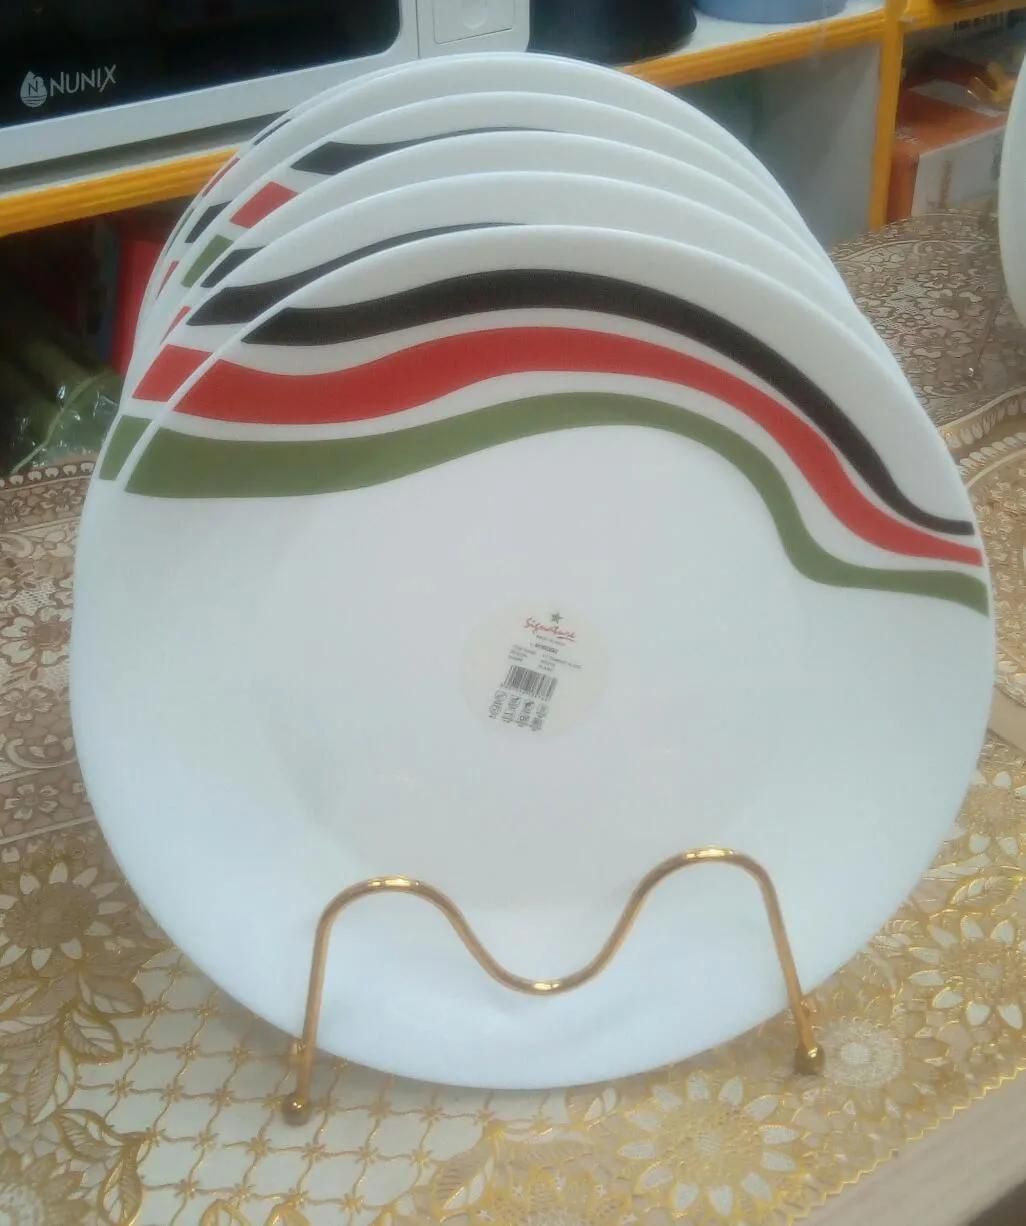 6PC BIG ROUND PLATES. 6pc Quality kitchen and dining round plates with Kenyan flag